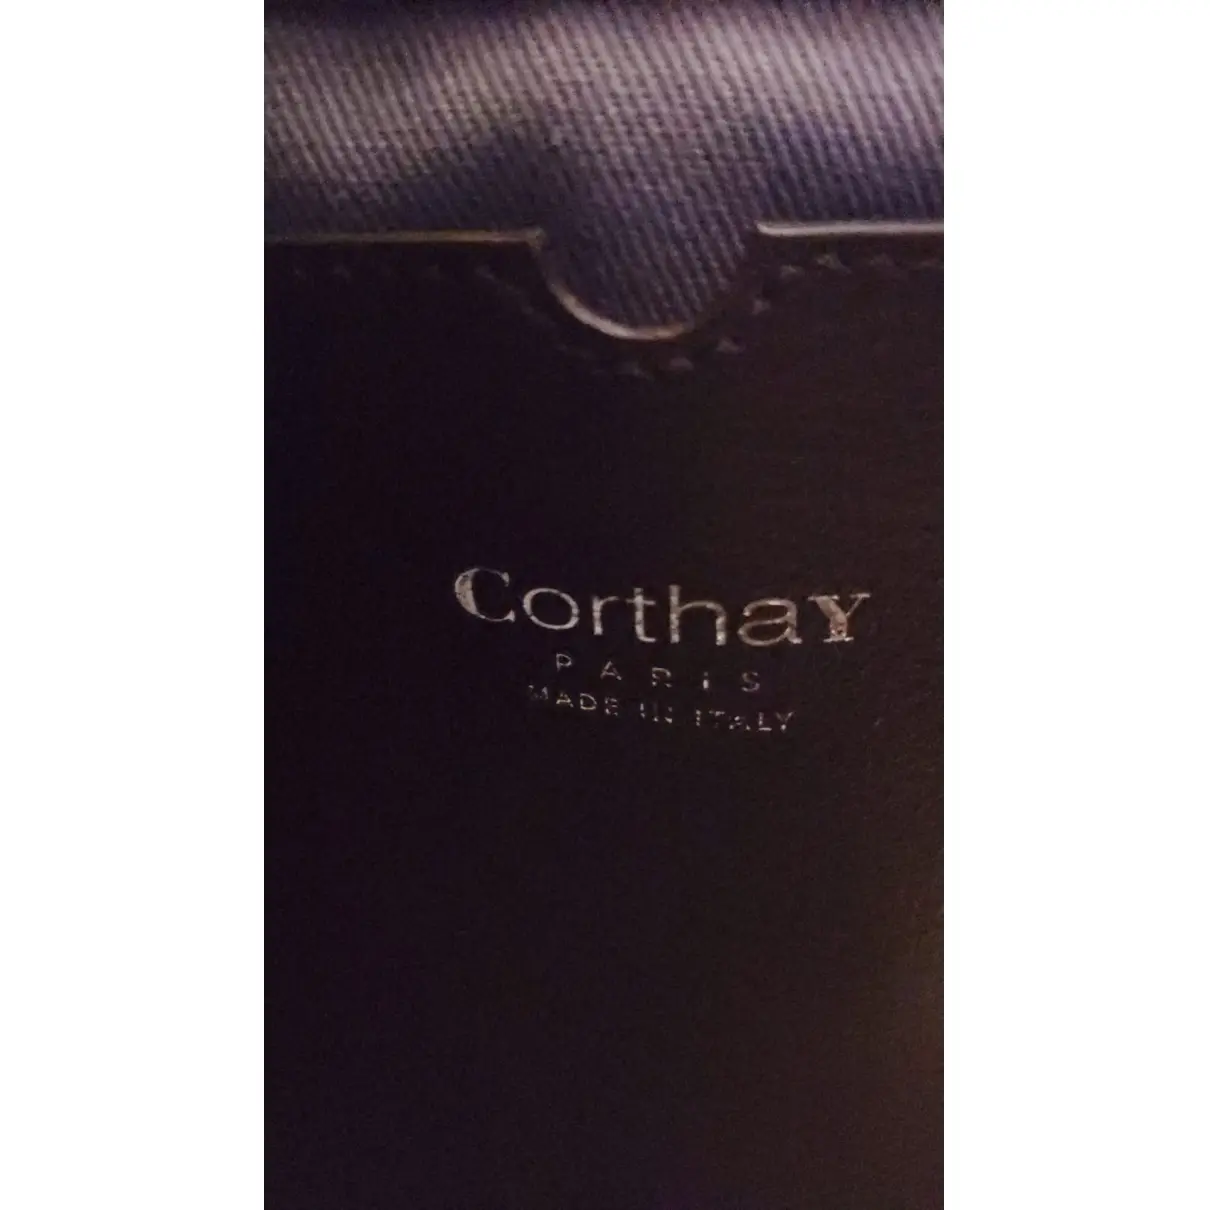 Buy Corthay Leather bag online